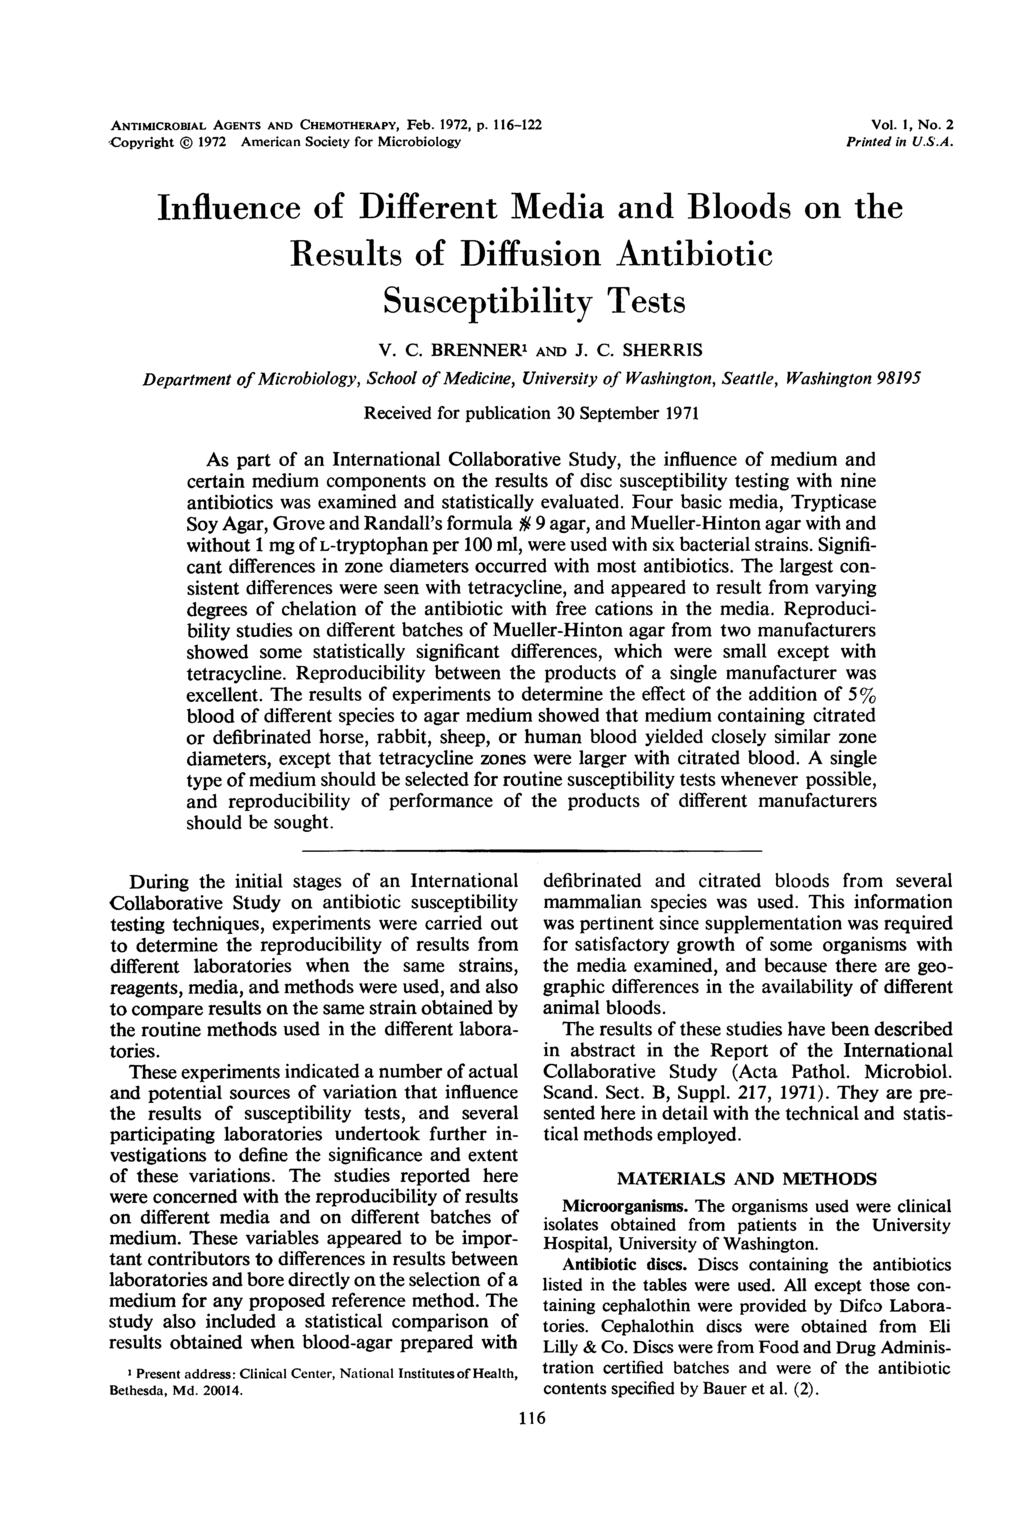 ANTIMICROBIAL AGENTS AND CHEMOTHERAPY, Feb. 1972, p. 116-122 Copyright @ 1972 American Society for Microbiology Vol. 1, No. 2 Printed in U.S.A. Influence of Different Media and Bloods on the Results of Diffusion Susceptibility Tests V.